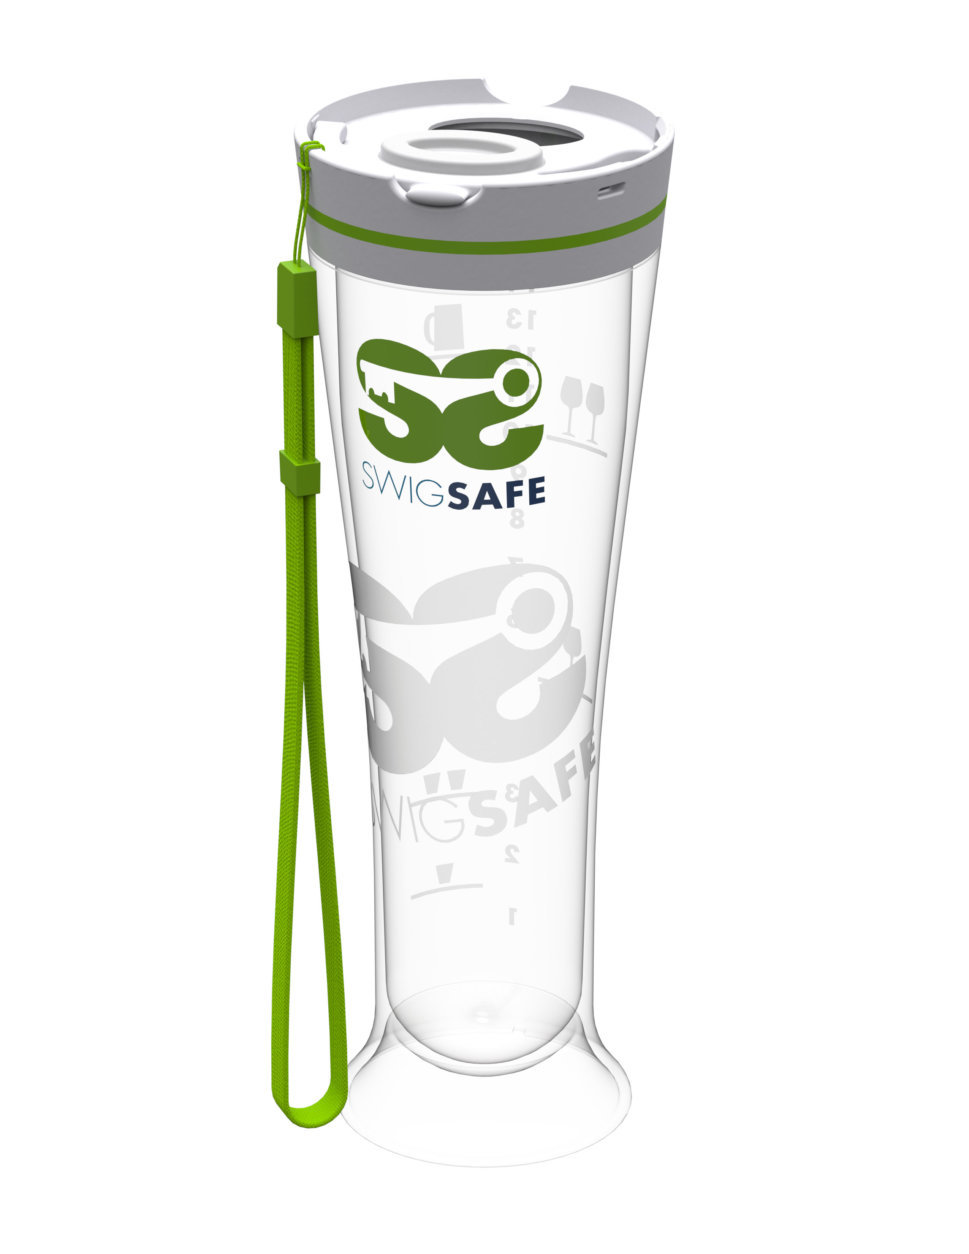 The SWIGSAFE is shaped like a pilsner glass and comes with a lanyard. (Courtesy SWIGSAFE)